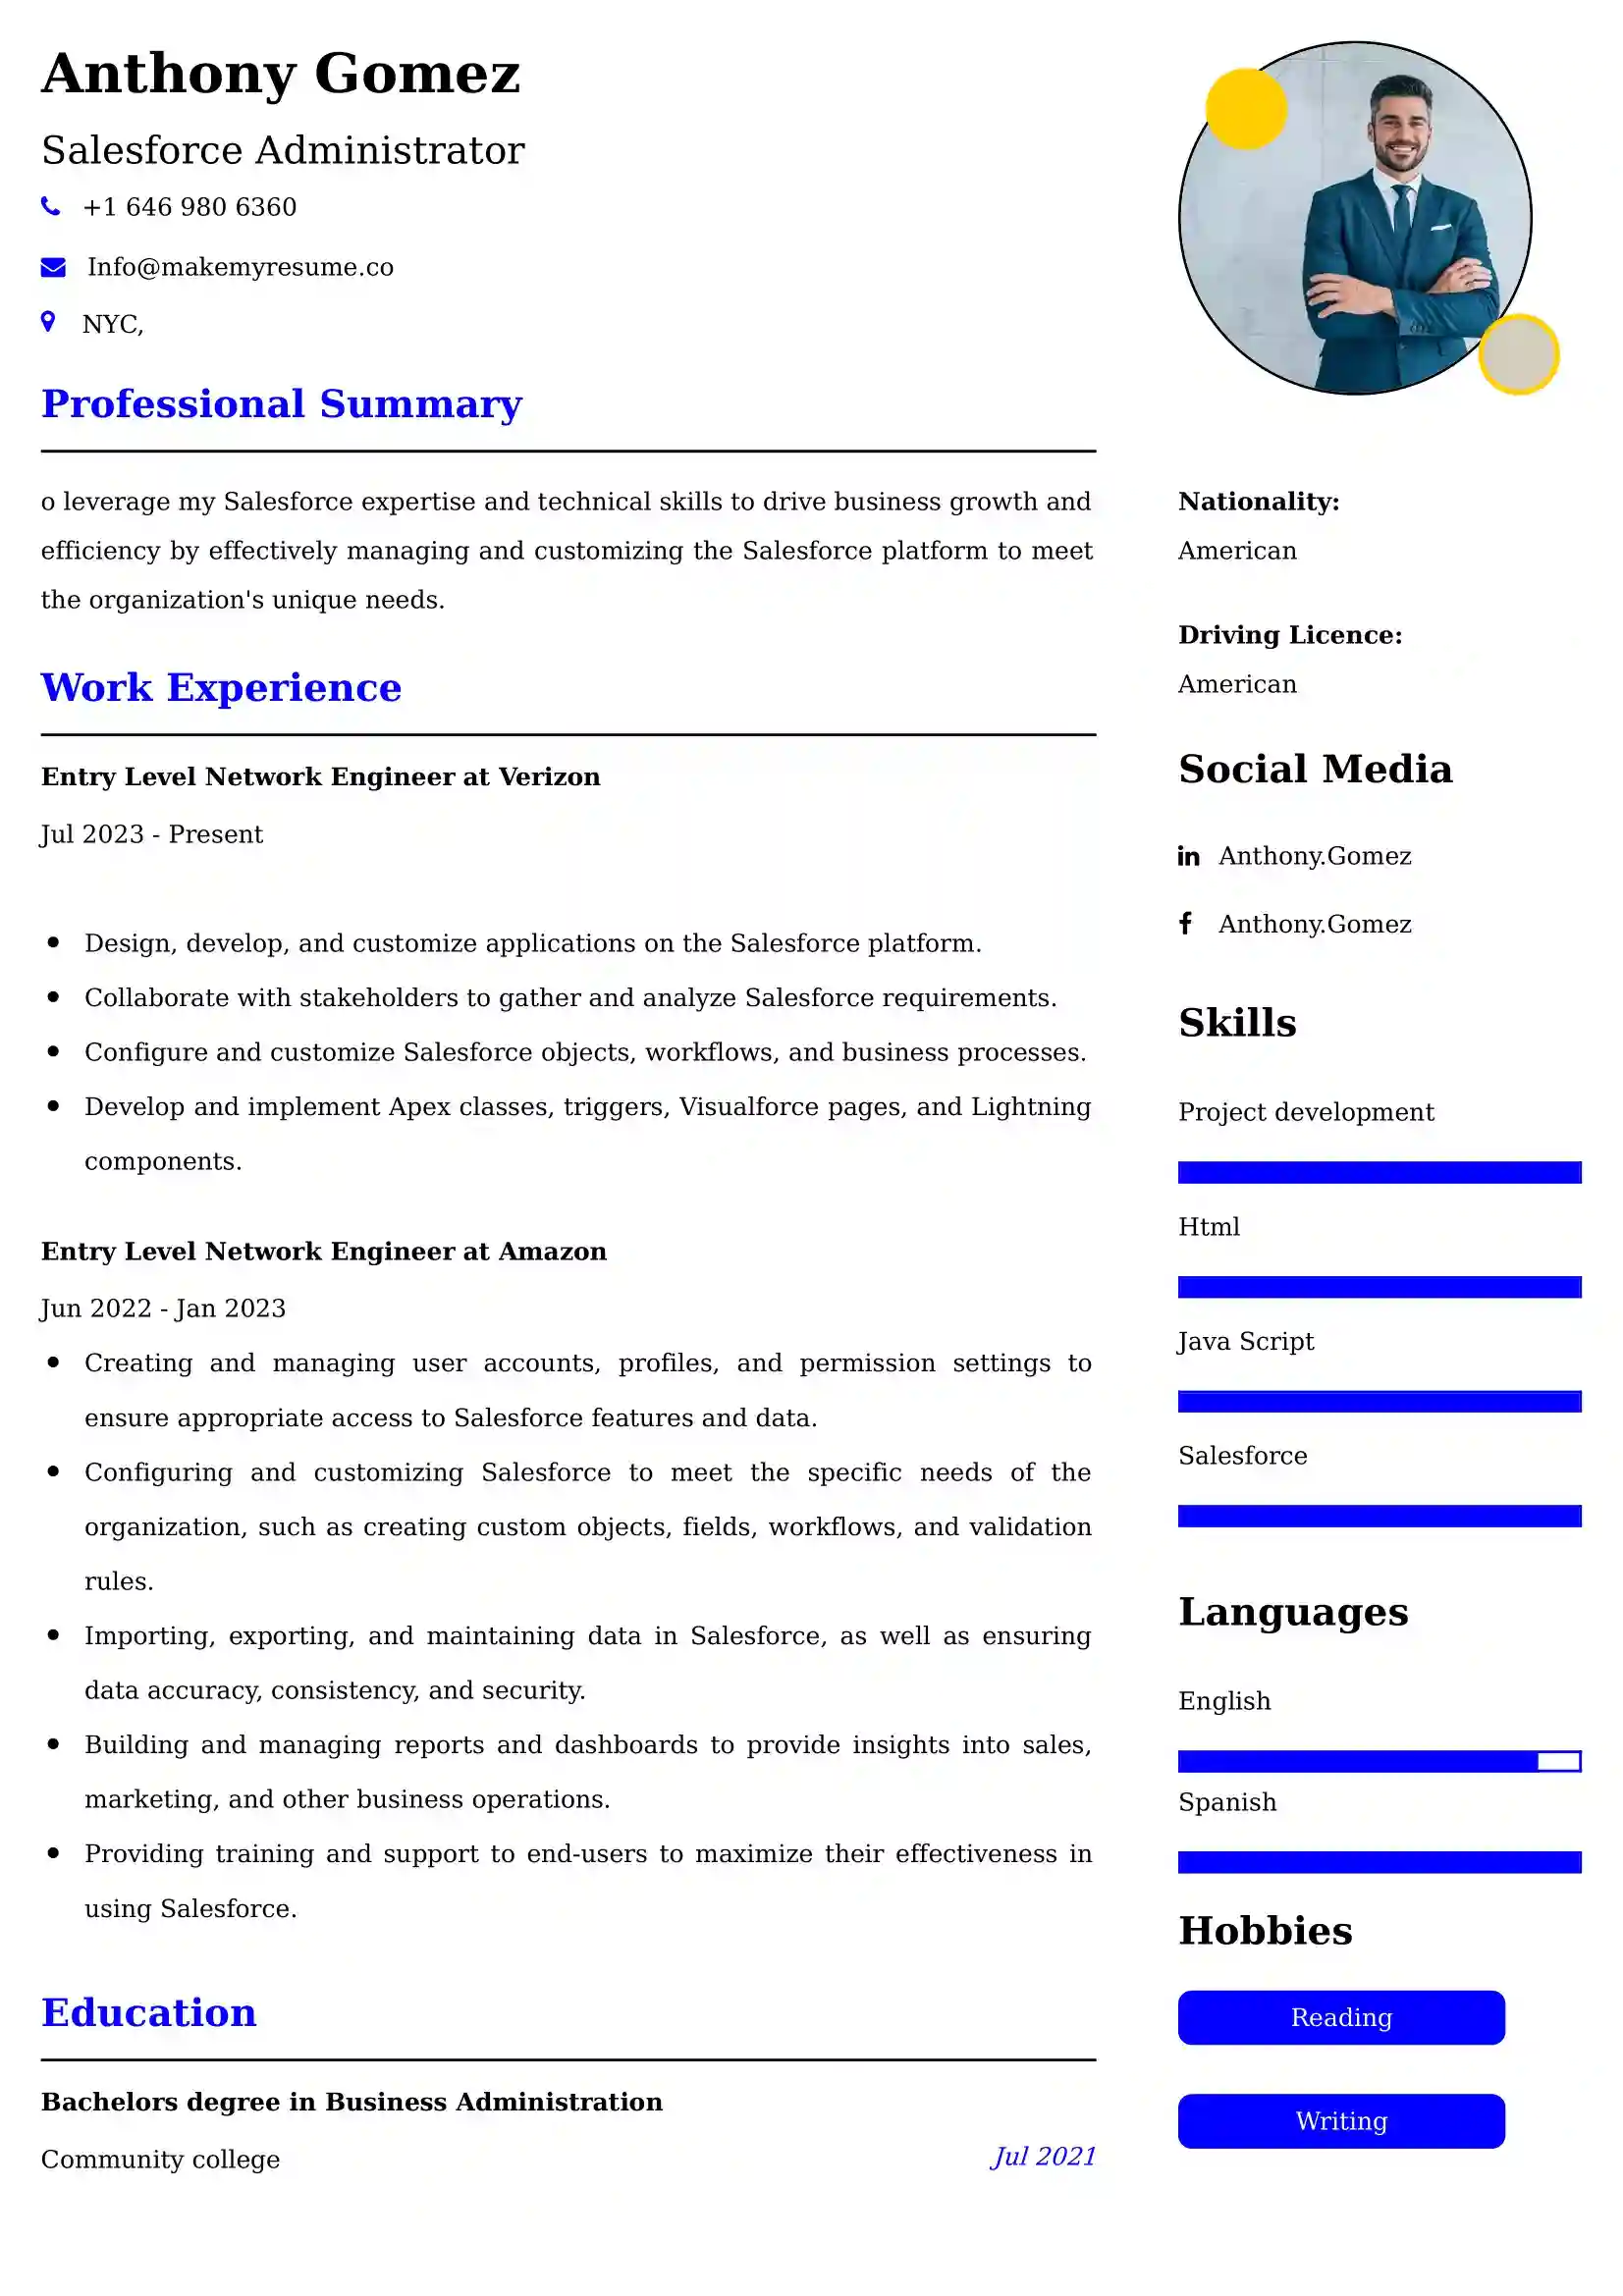 Salesforce Administrator Resume Examples - Brazilian Format, Latest Template